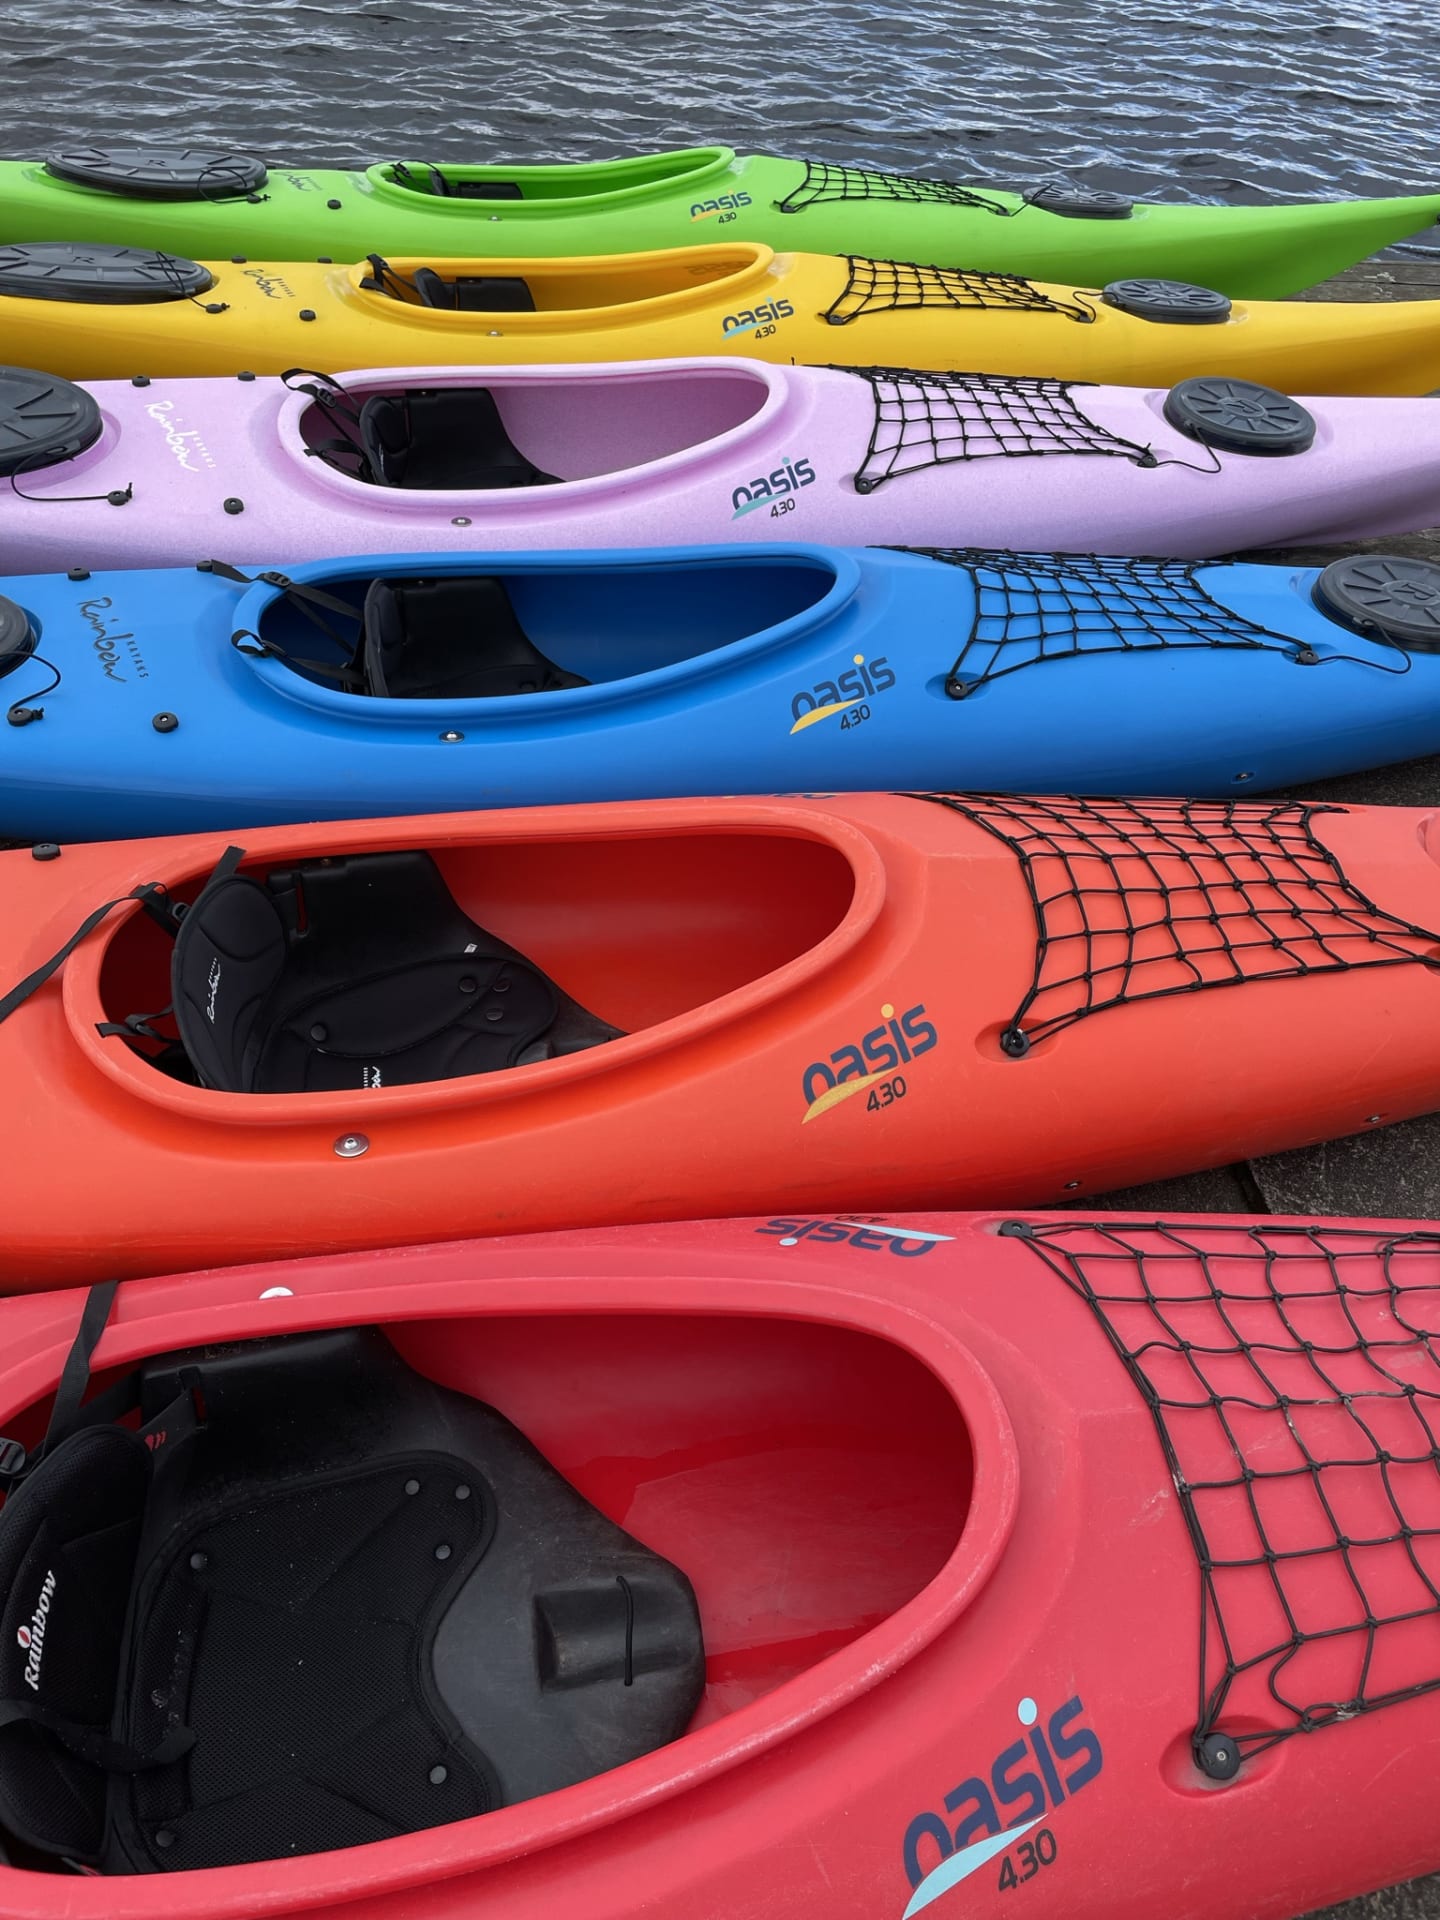 Details of the kayaks.